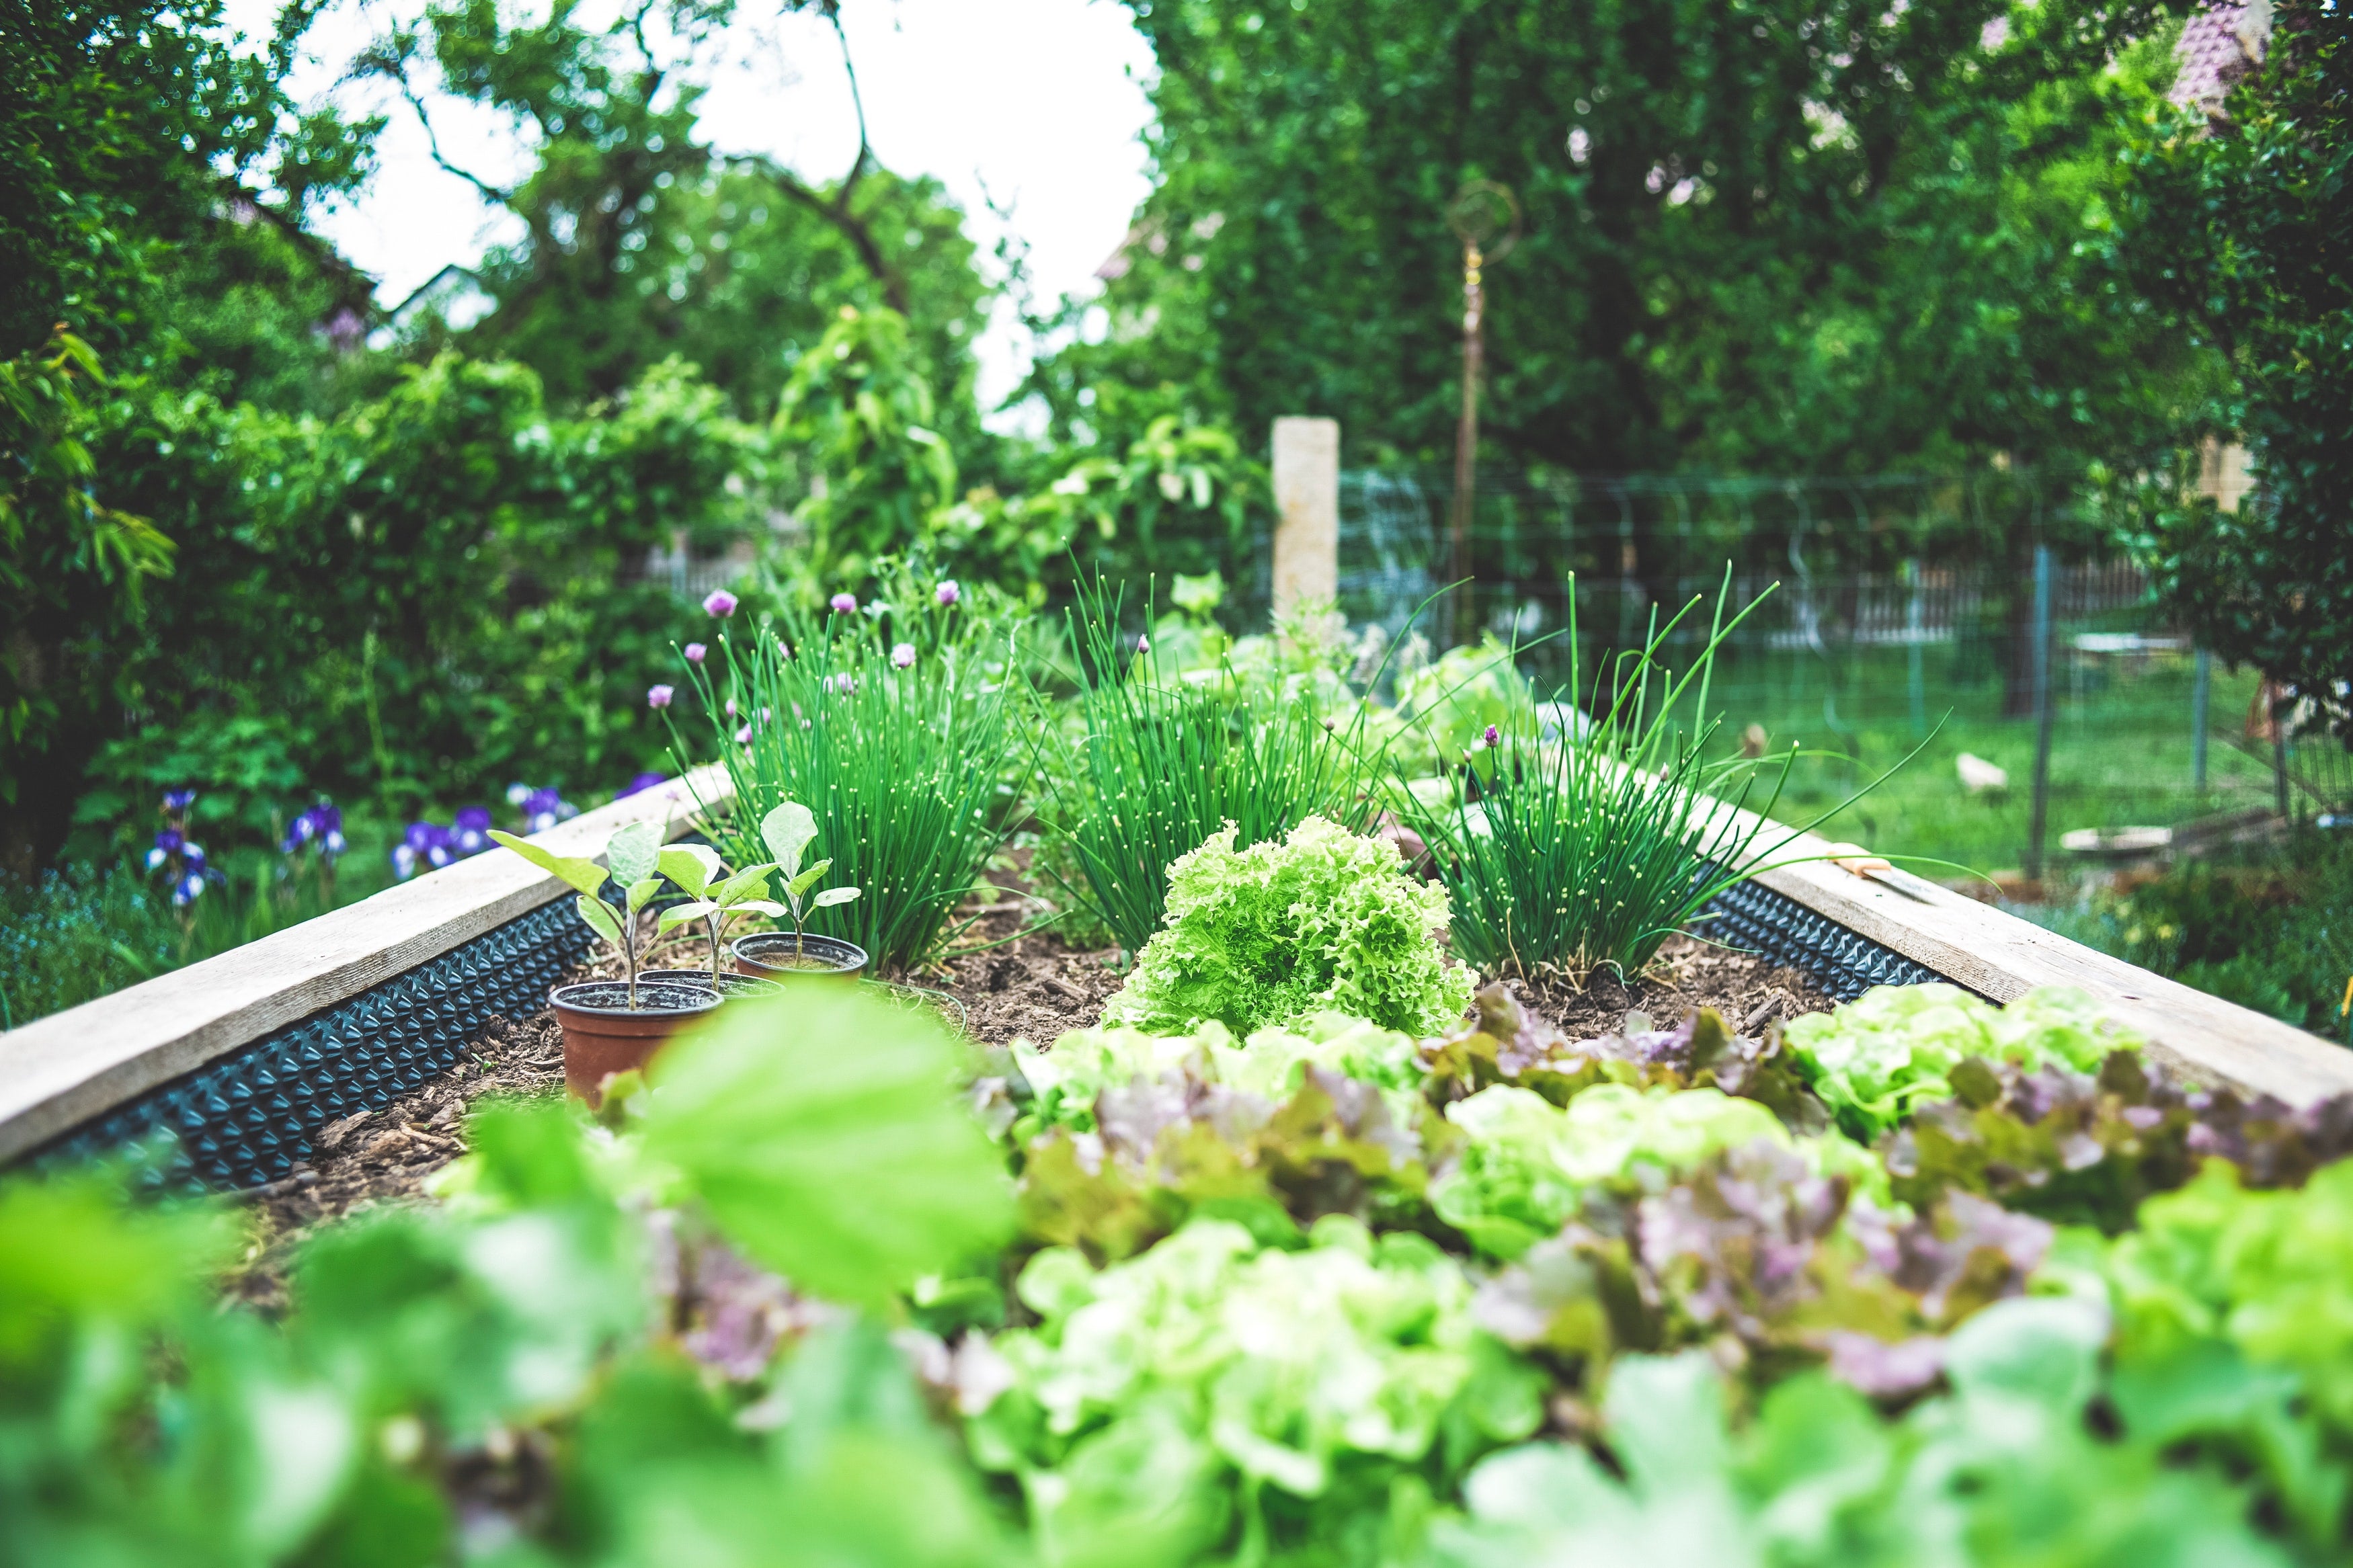 How to Build a Raised Bed Garden in 4 Easy Steps